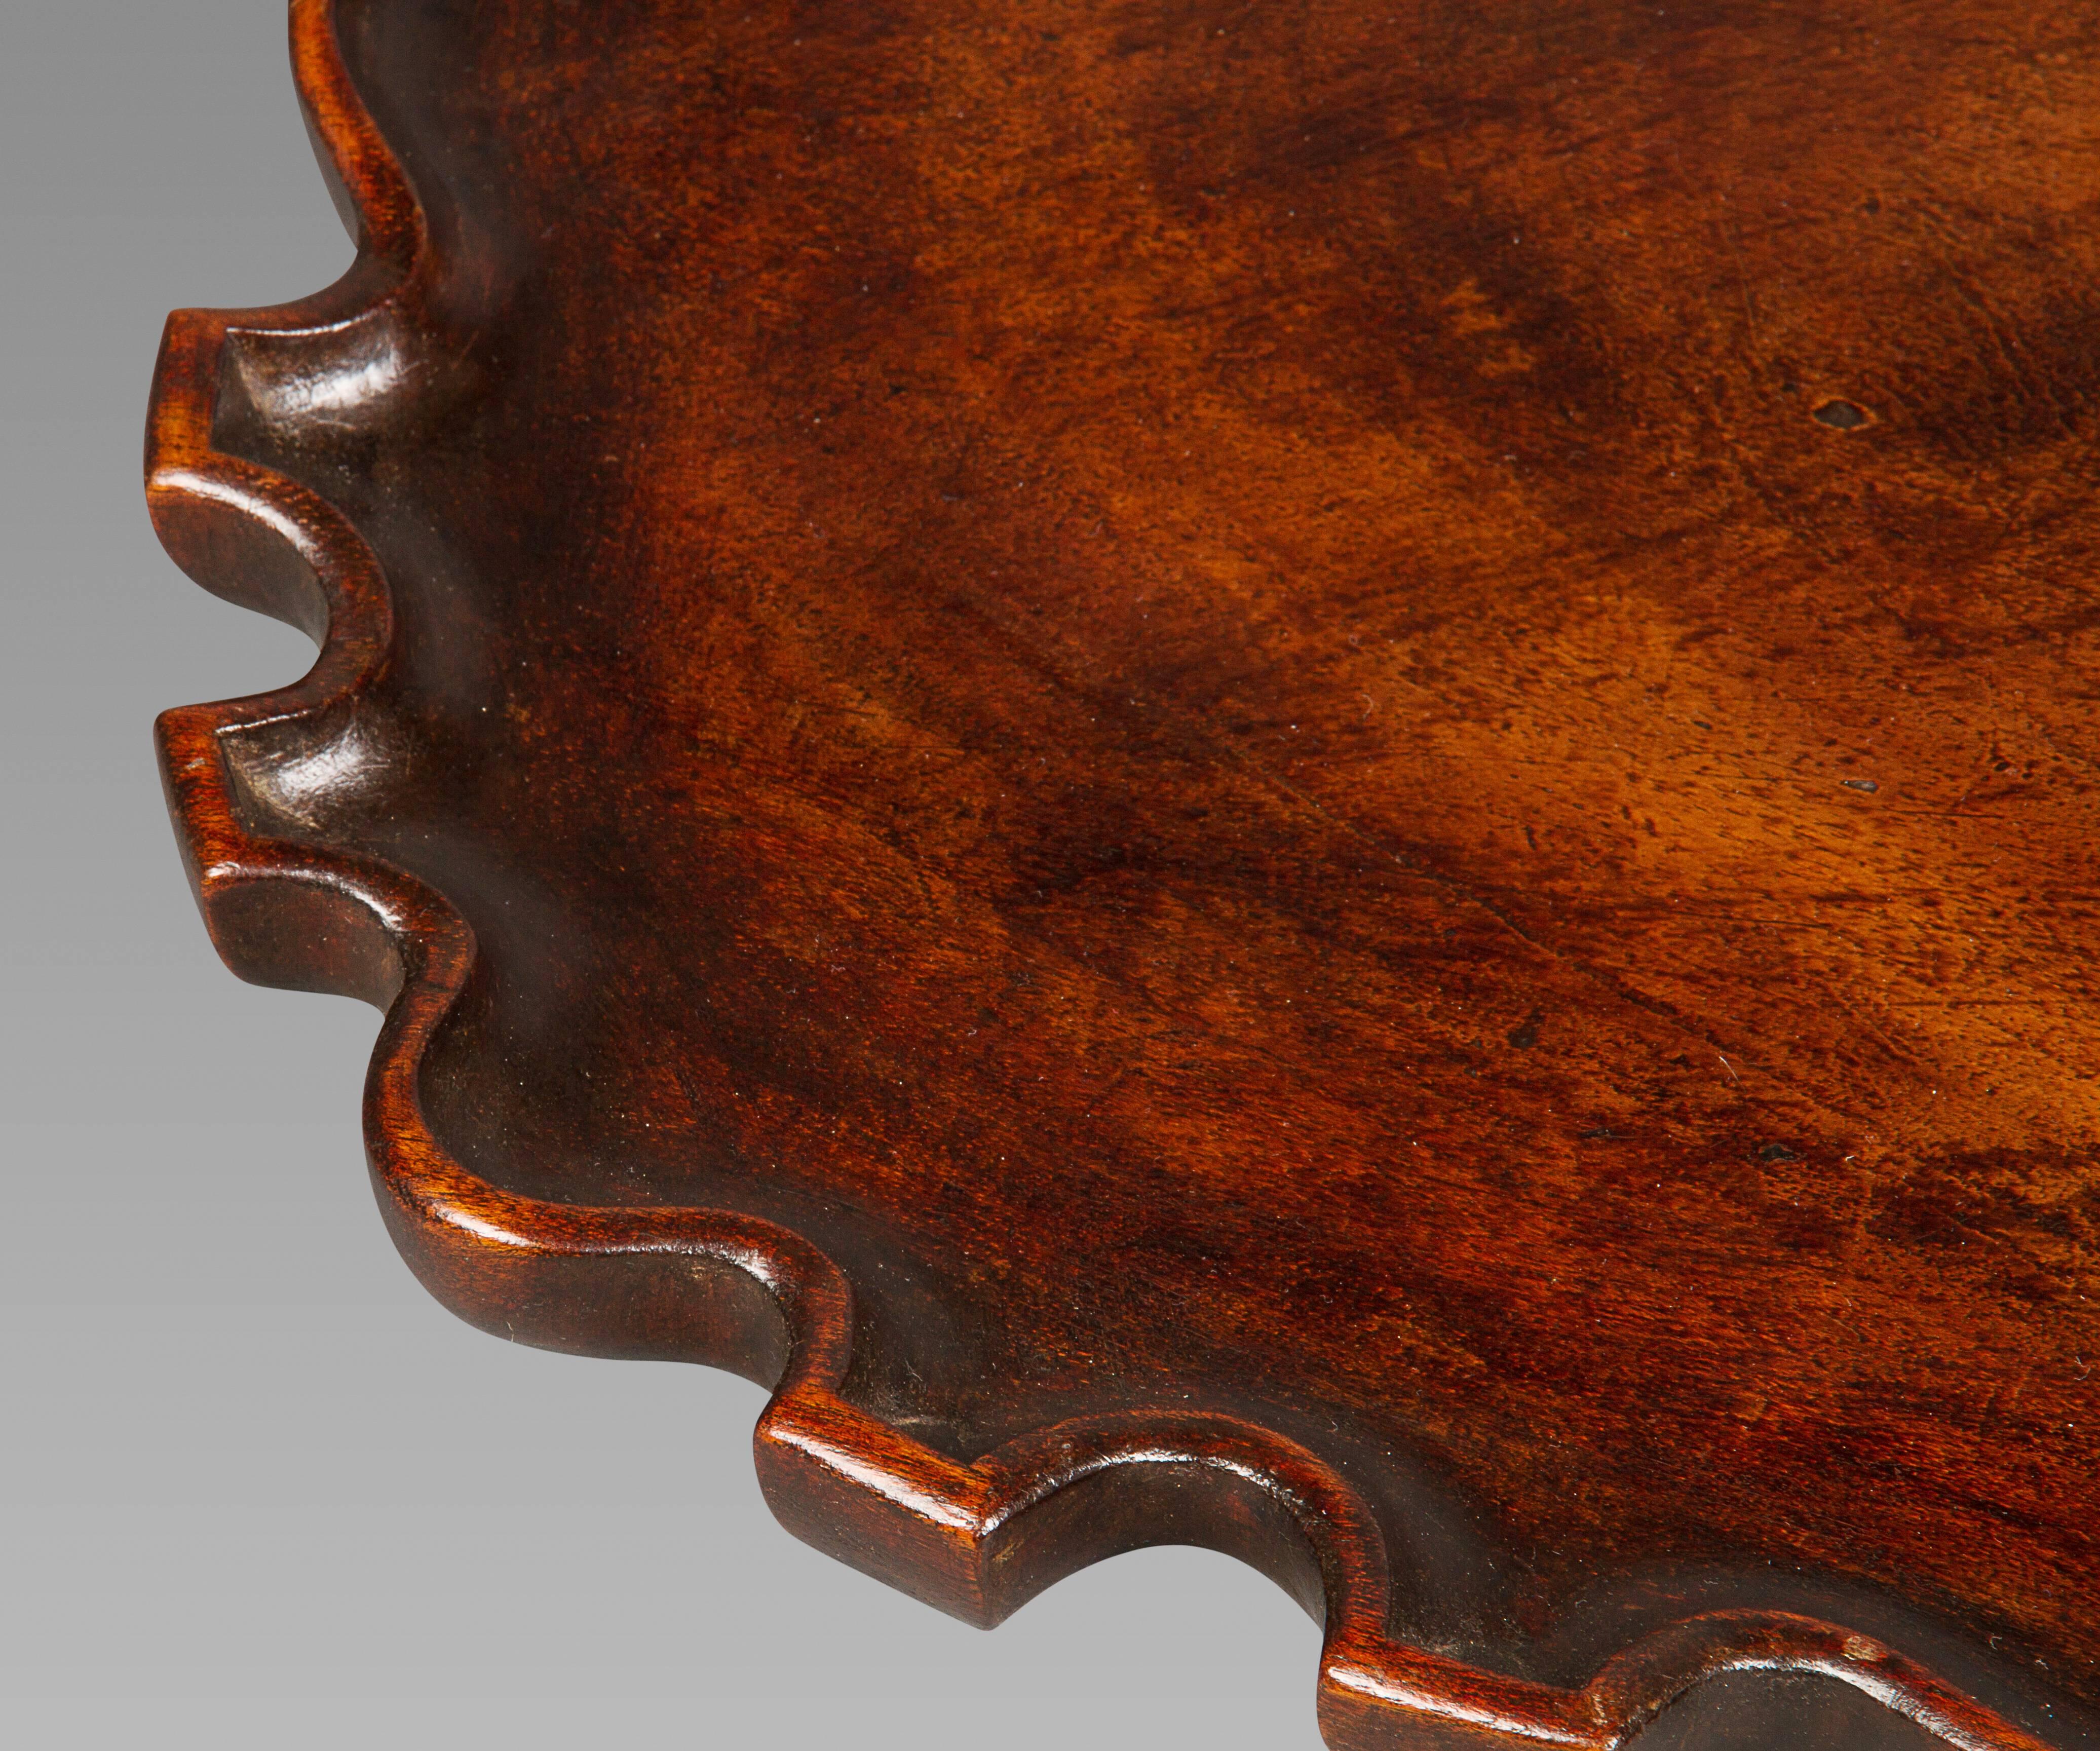 A very fine tray in dense mahogany with deep rich color and patina. This piece has an attractive outline and can be considered rare.